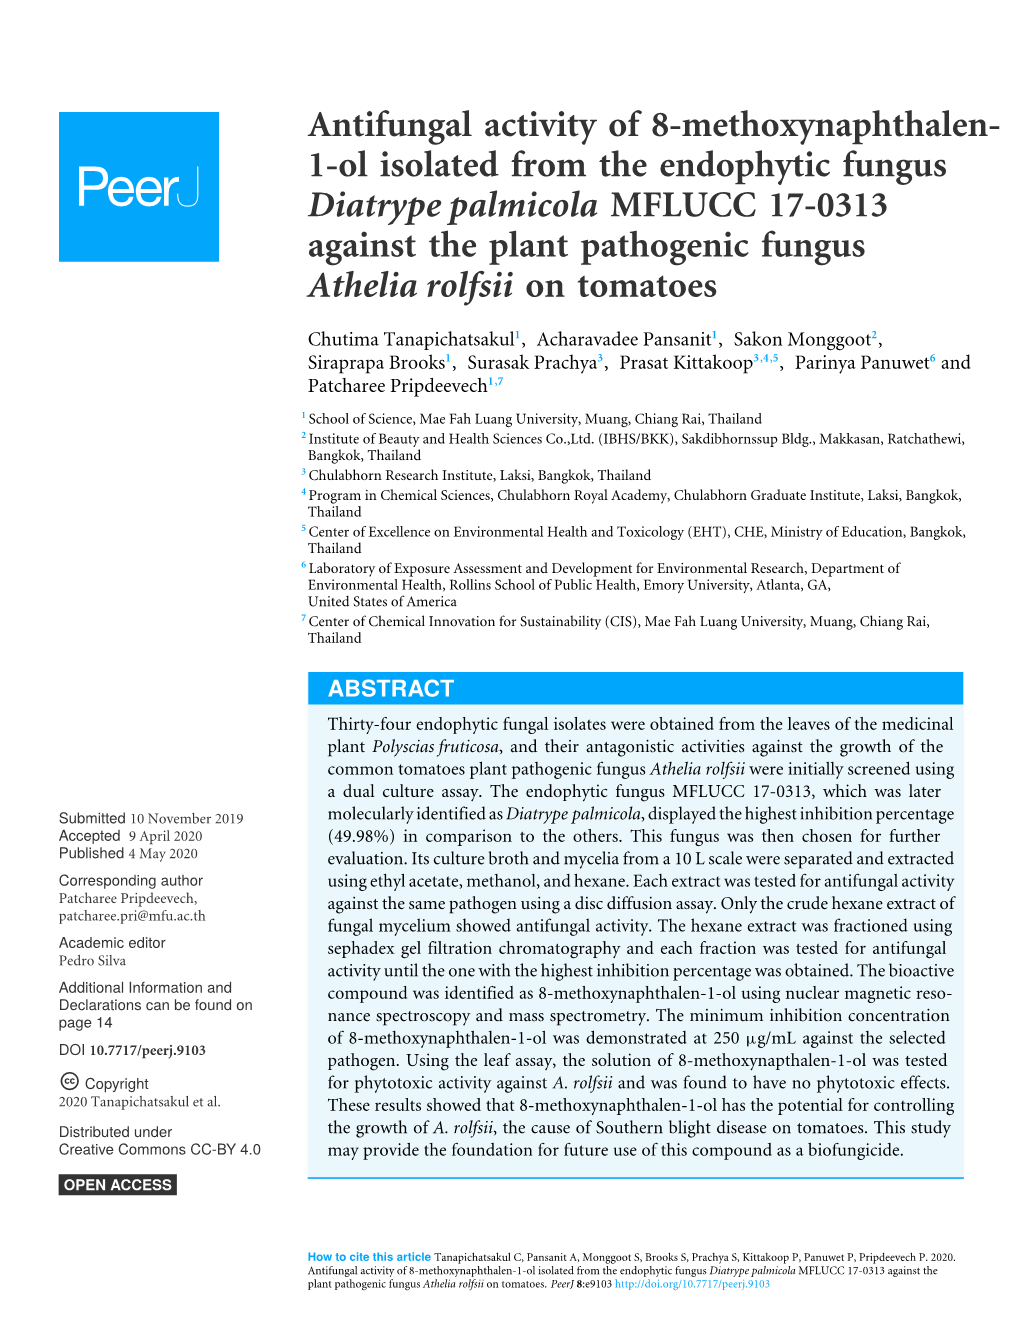 Antifungal Activity of 8-Methoxynaphthalen- 1-Ol Isolated from the Endophytic Fungus Diatrype Palmicola MFLUCC 17-0313 Against T